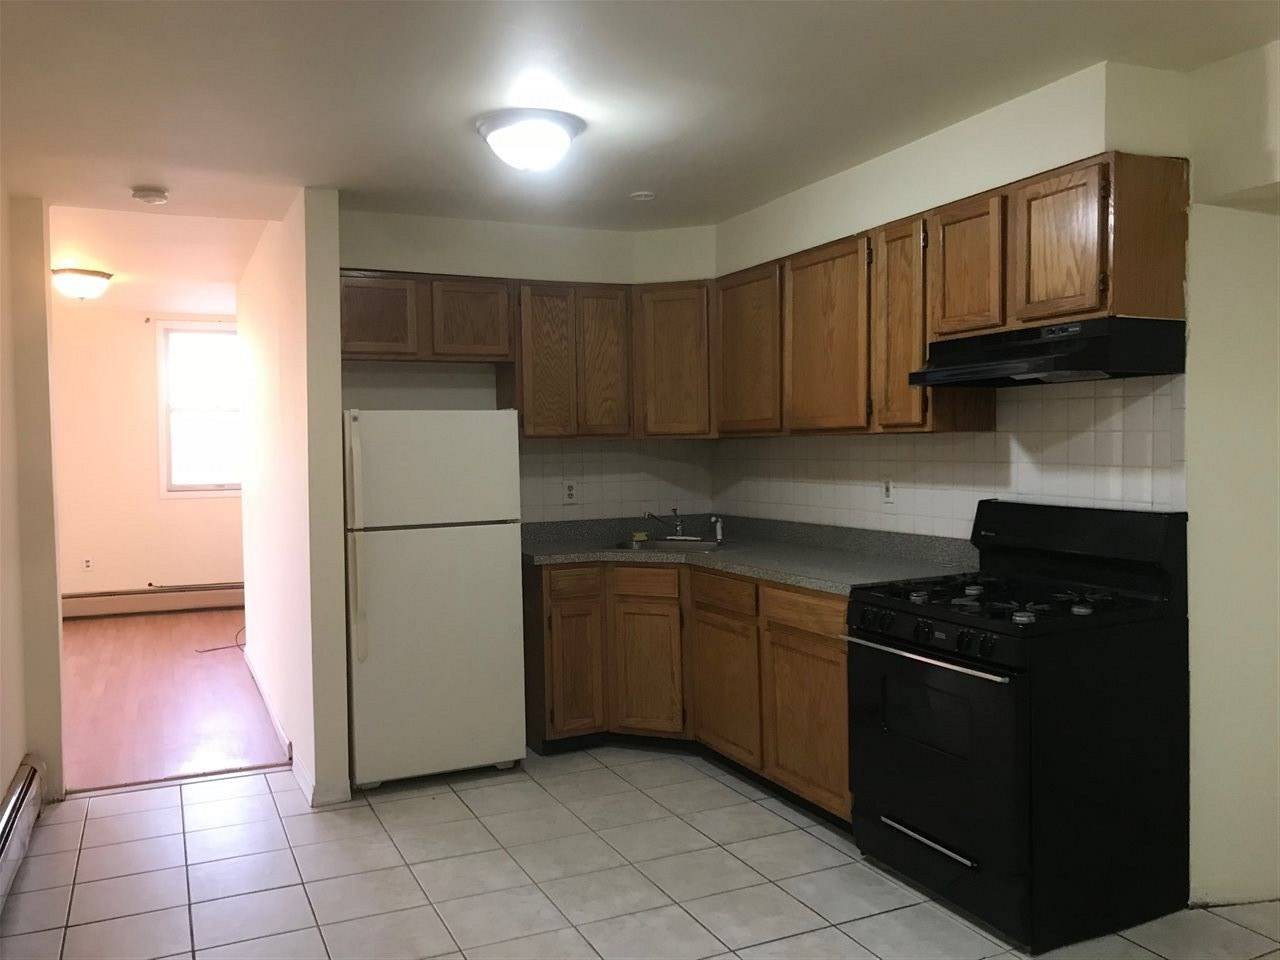 Commuters Dream - 2 BR New Jersey